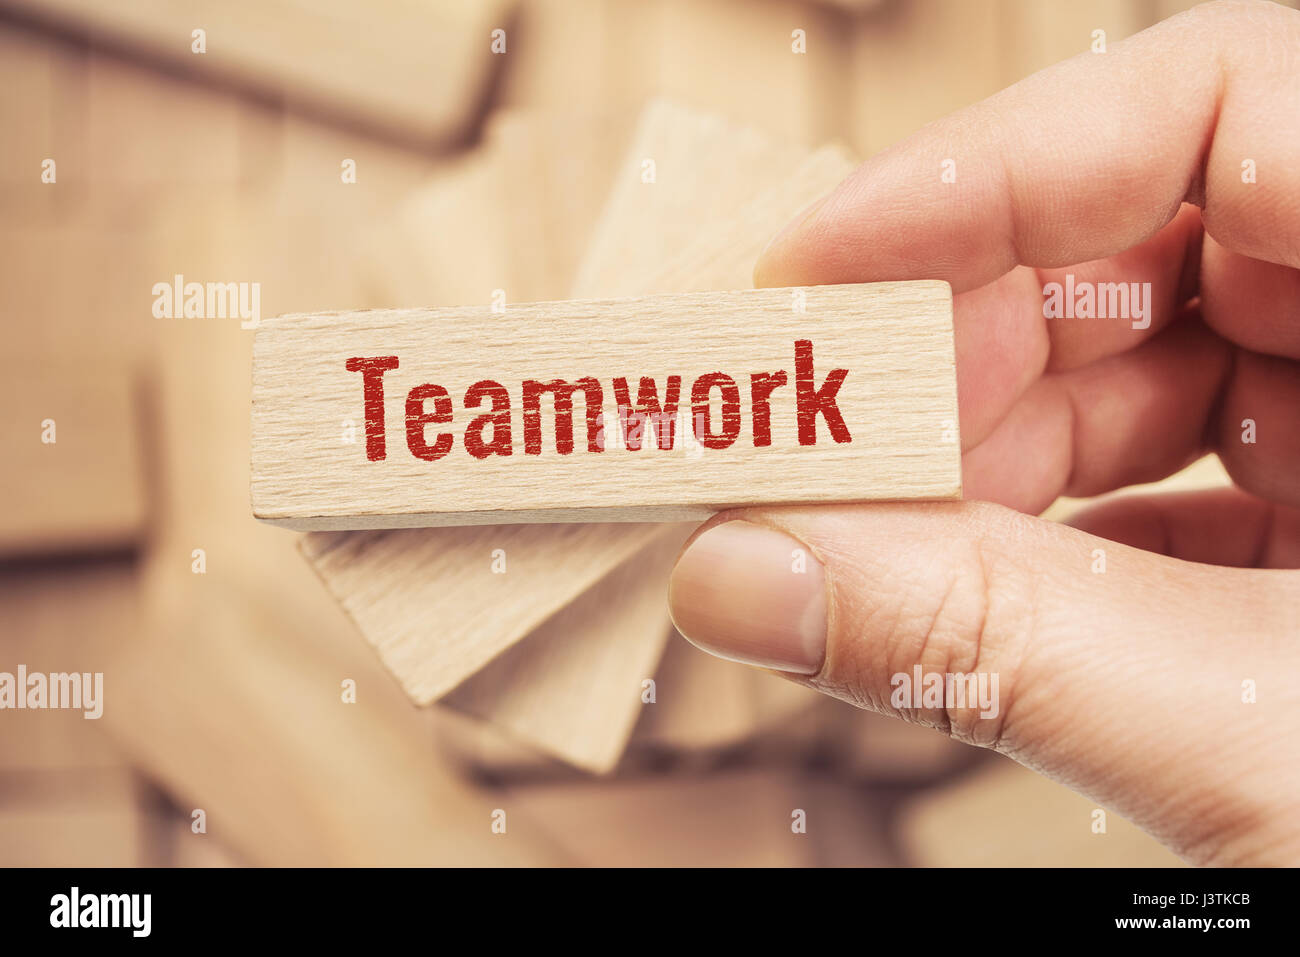 TEAMWORK word made with building blocks Stock Photo